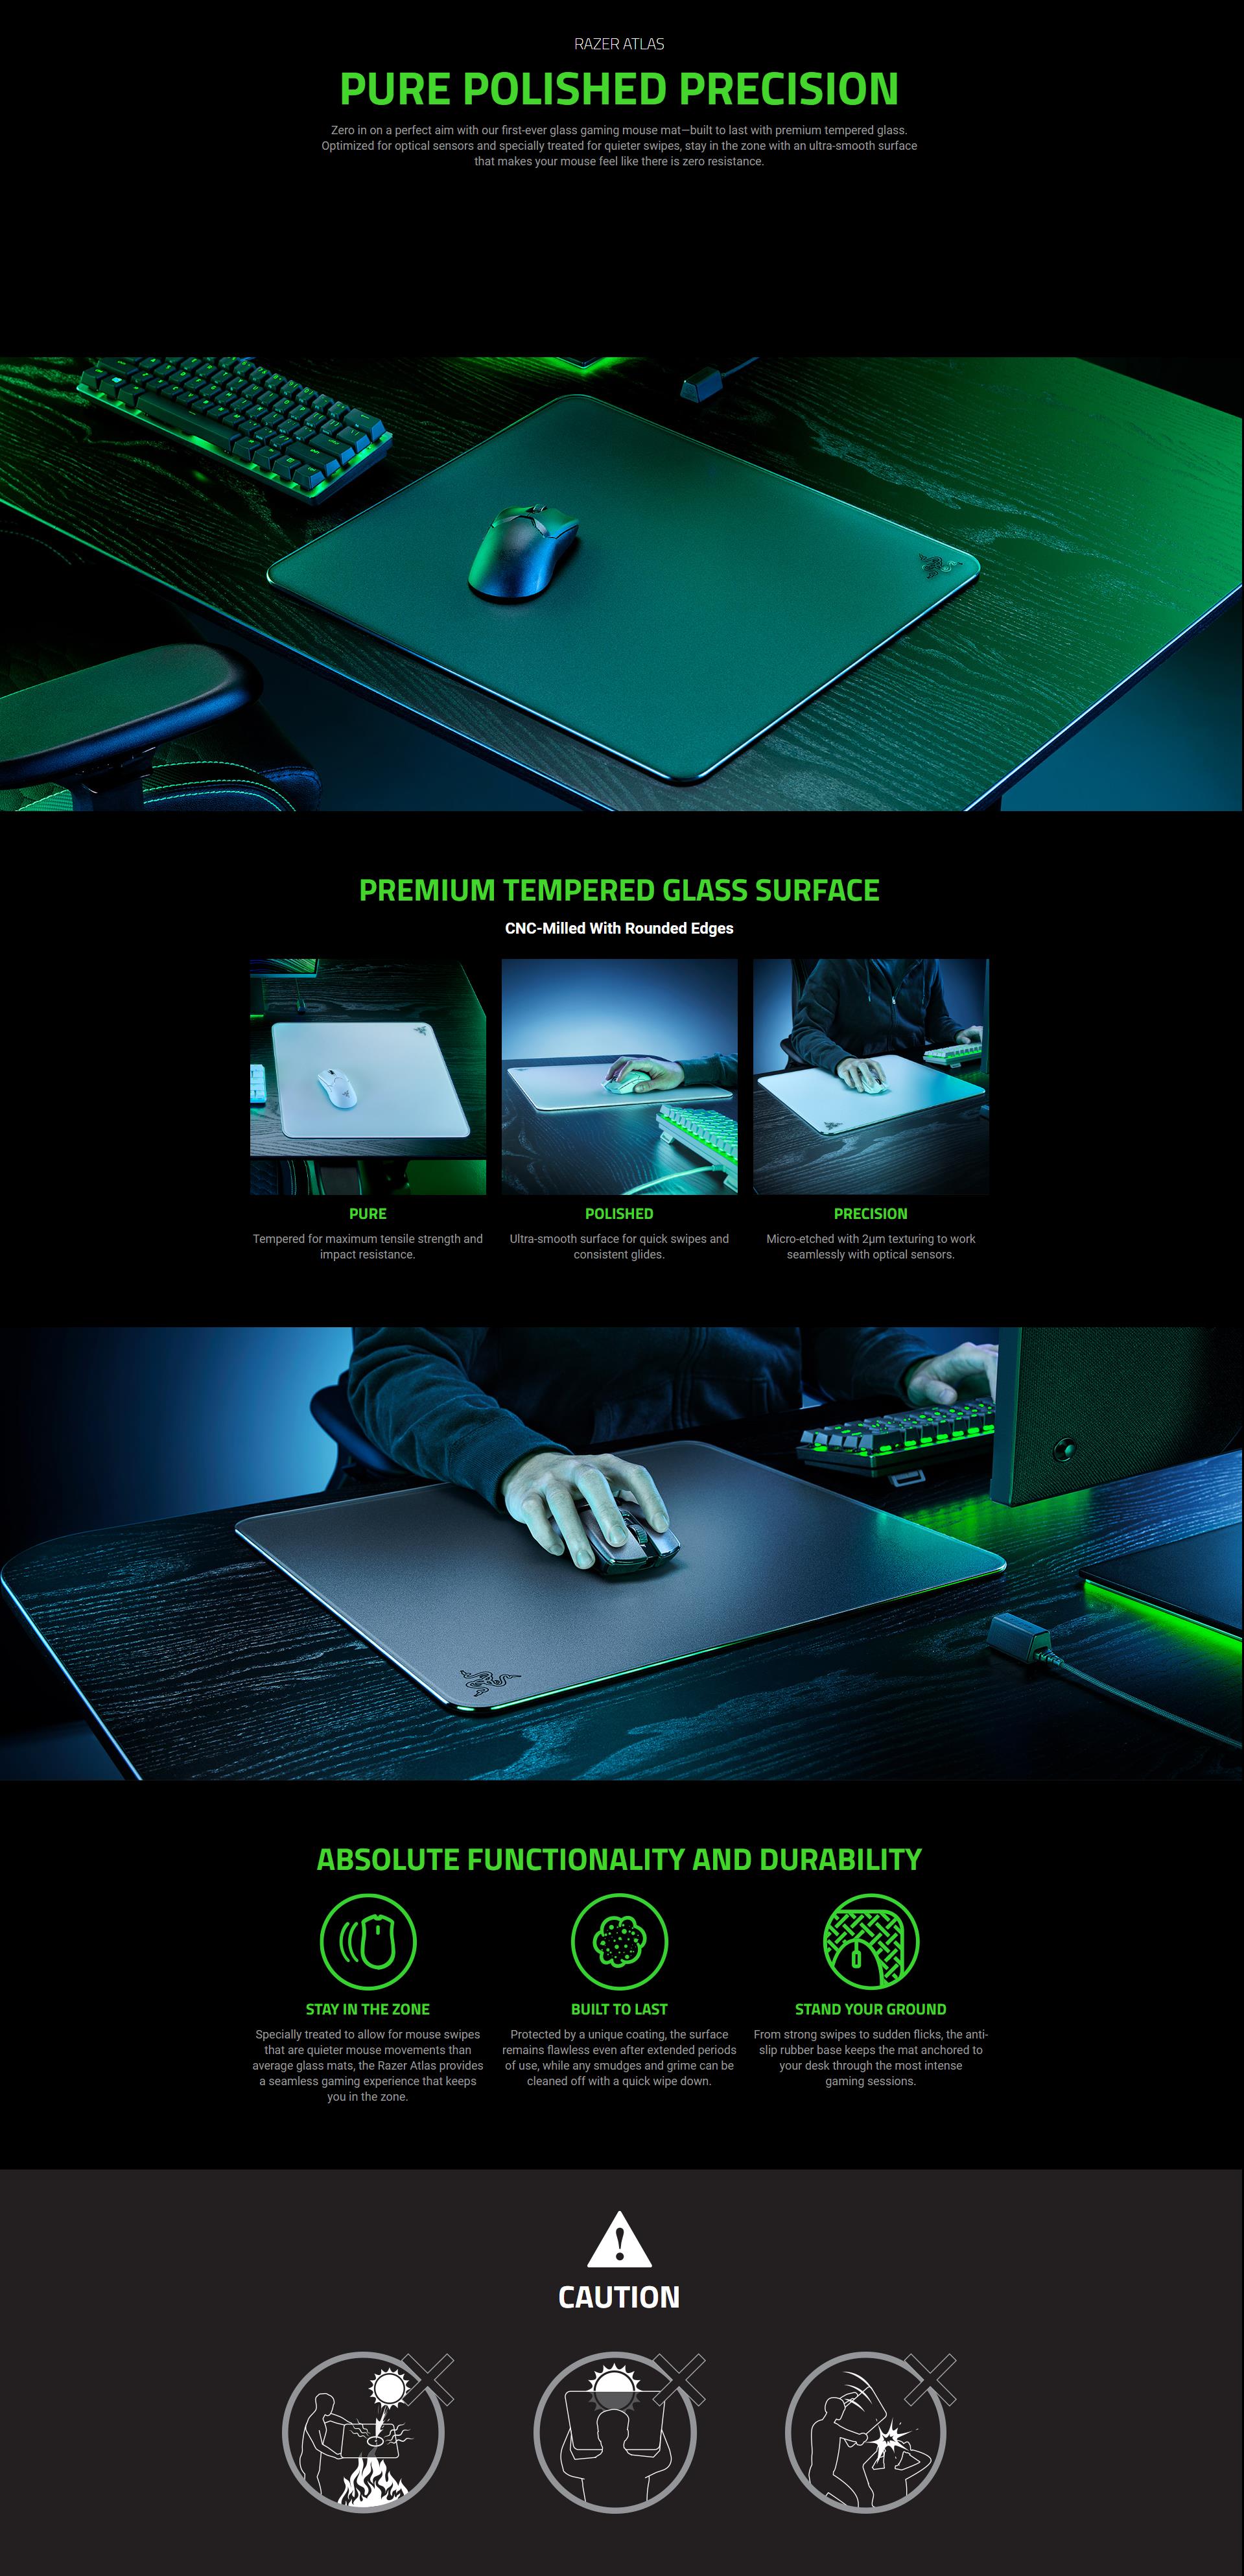 A large marketing image providing additional information about the product Razer Atlas - Premium Tempered Glass Mat (Black) - Additional alt info not provided